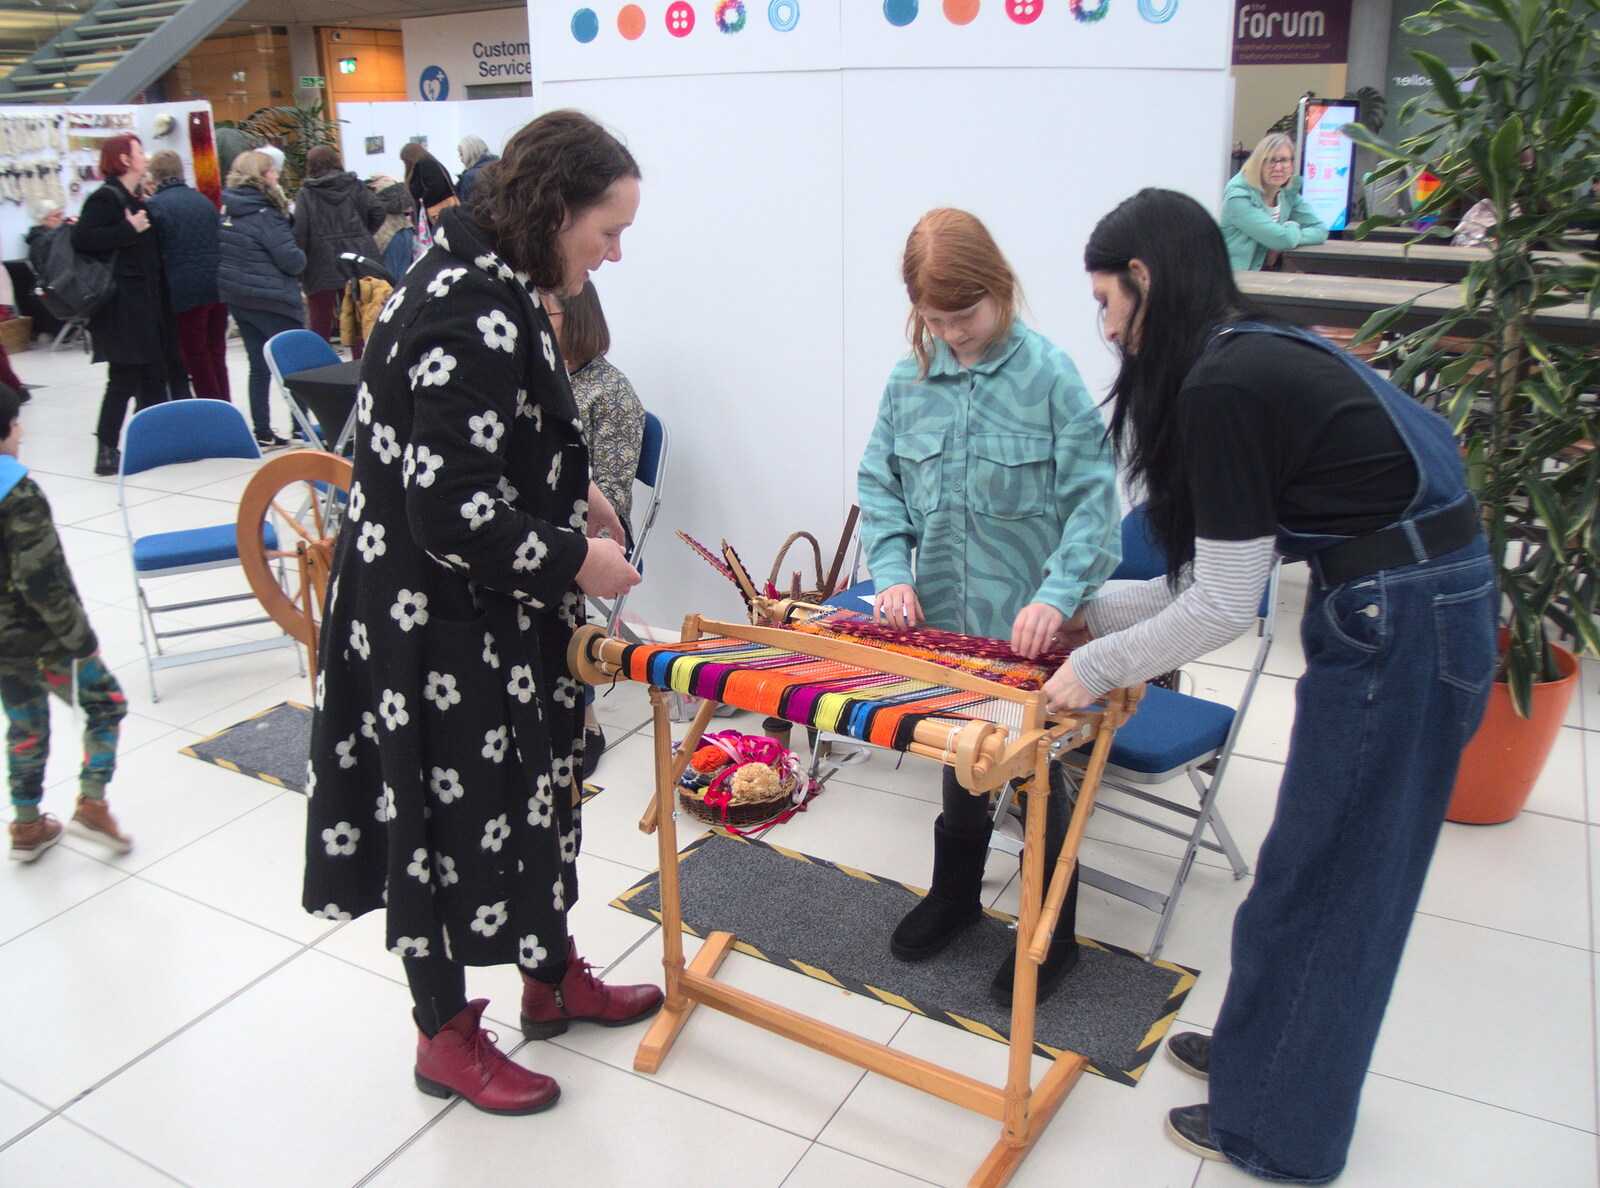 Someone tries out a hand loom from It's a Stitch Up: A Trip to Norwich, Norfolk - 18th March 2023